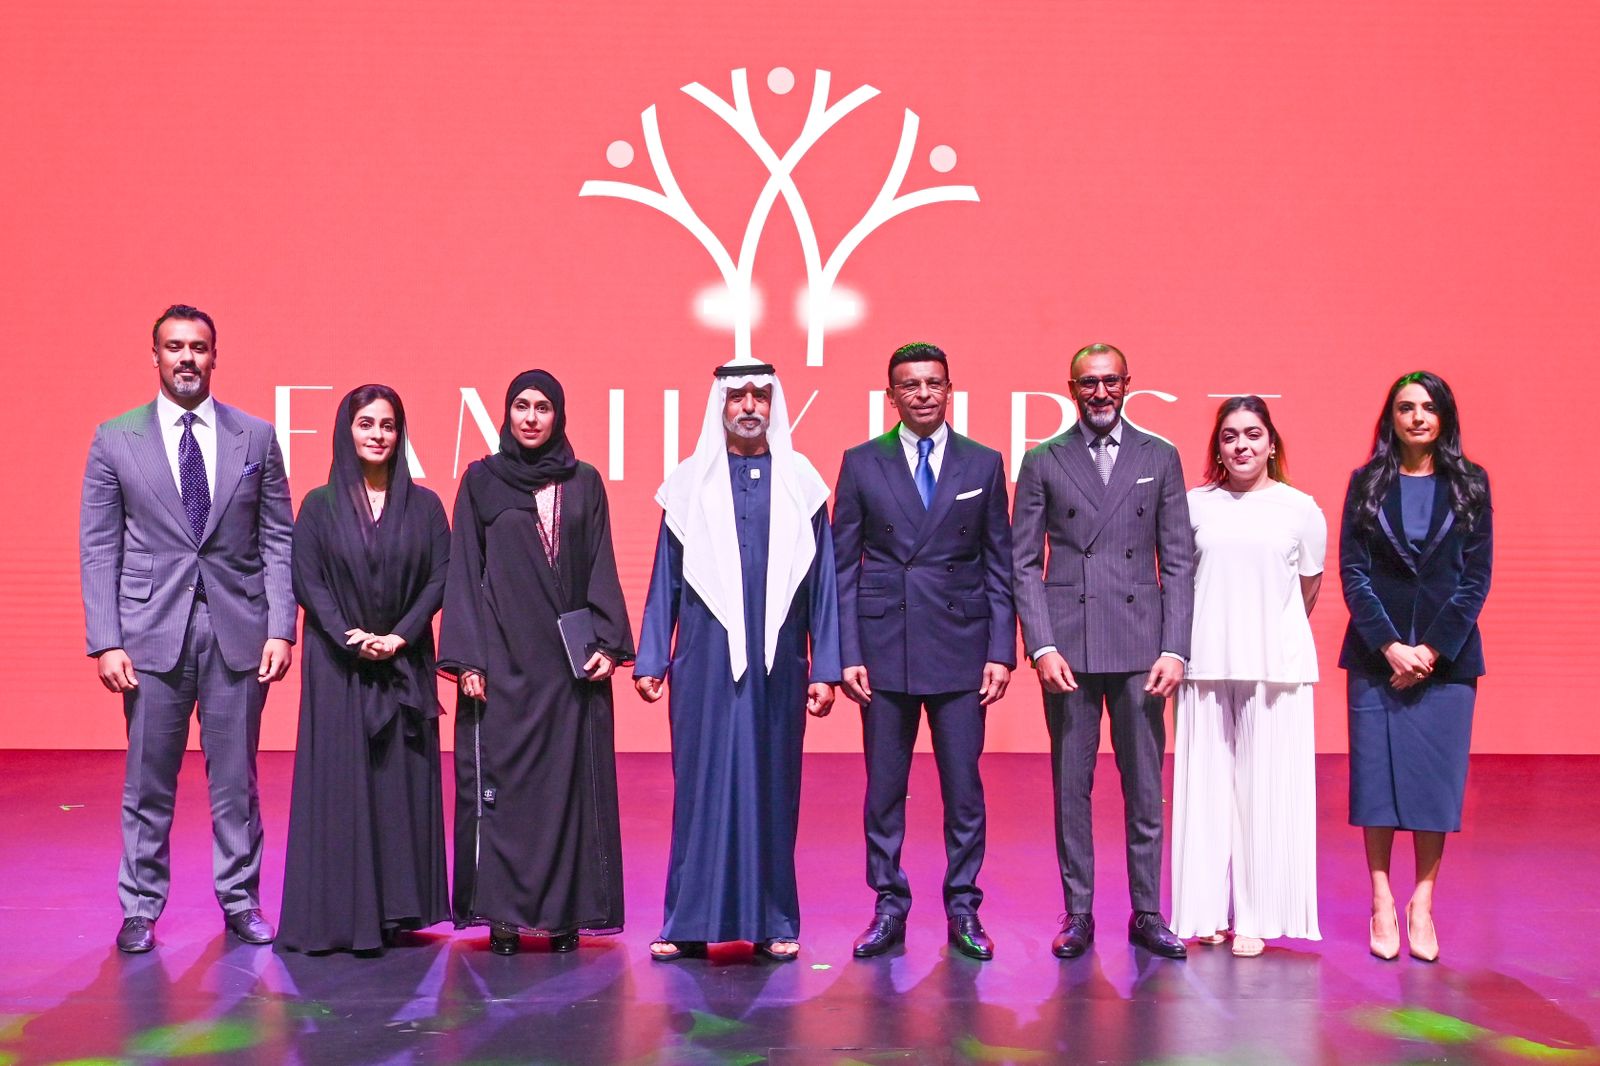 Sheikh Nahyan joins GEMS Education to launch major new global movement to put ‘Family First’